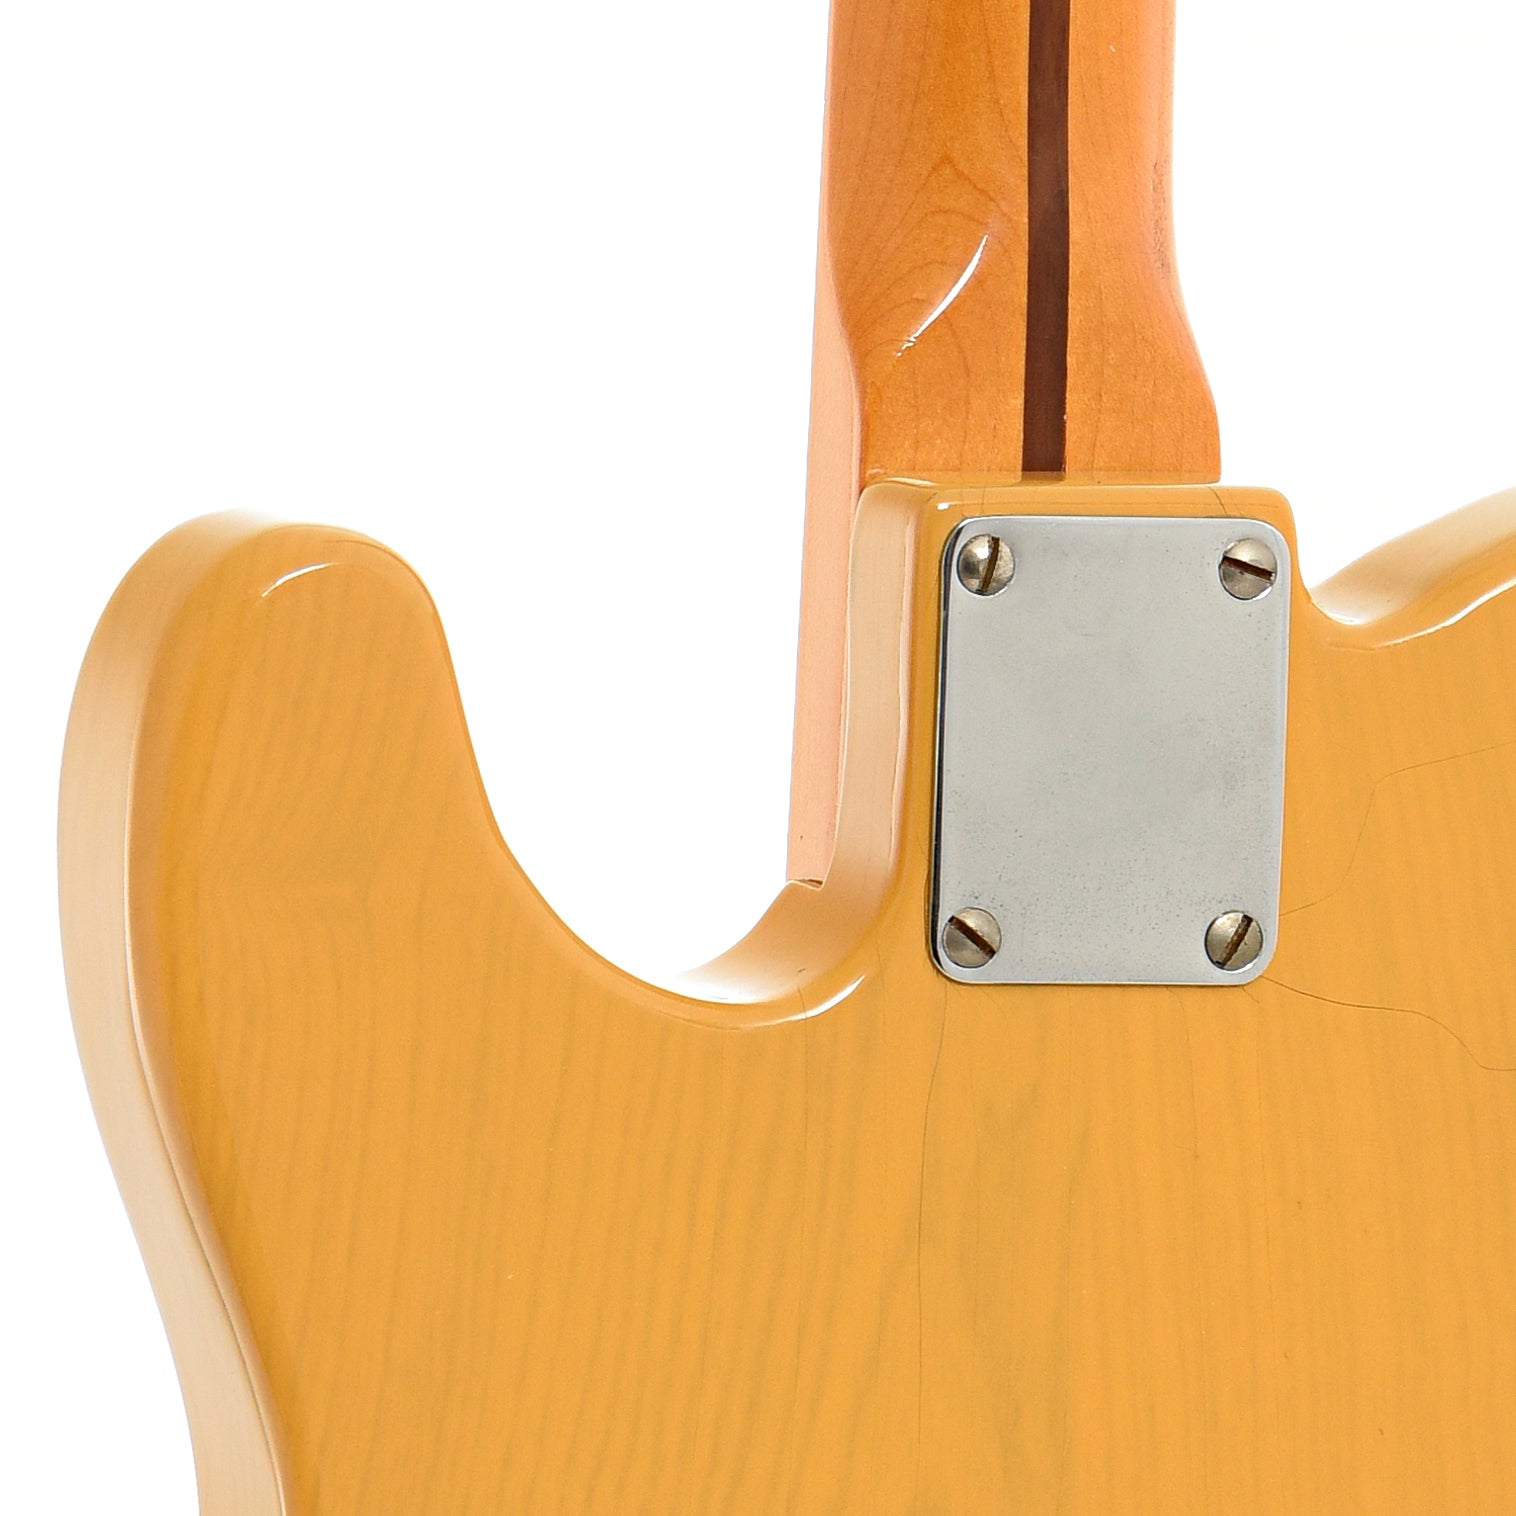 Neck joint of Fender '52 Reissue Telecaster Electric Guitar (1984)